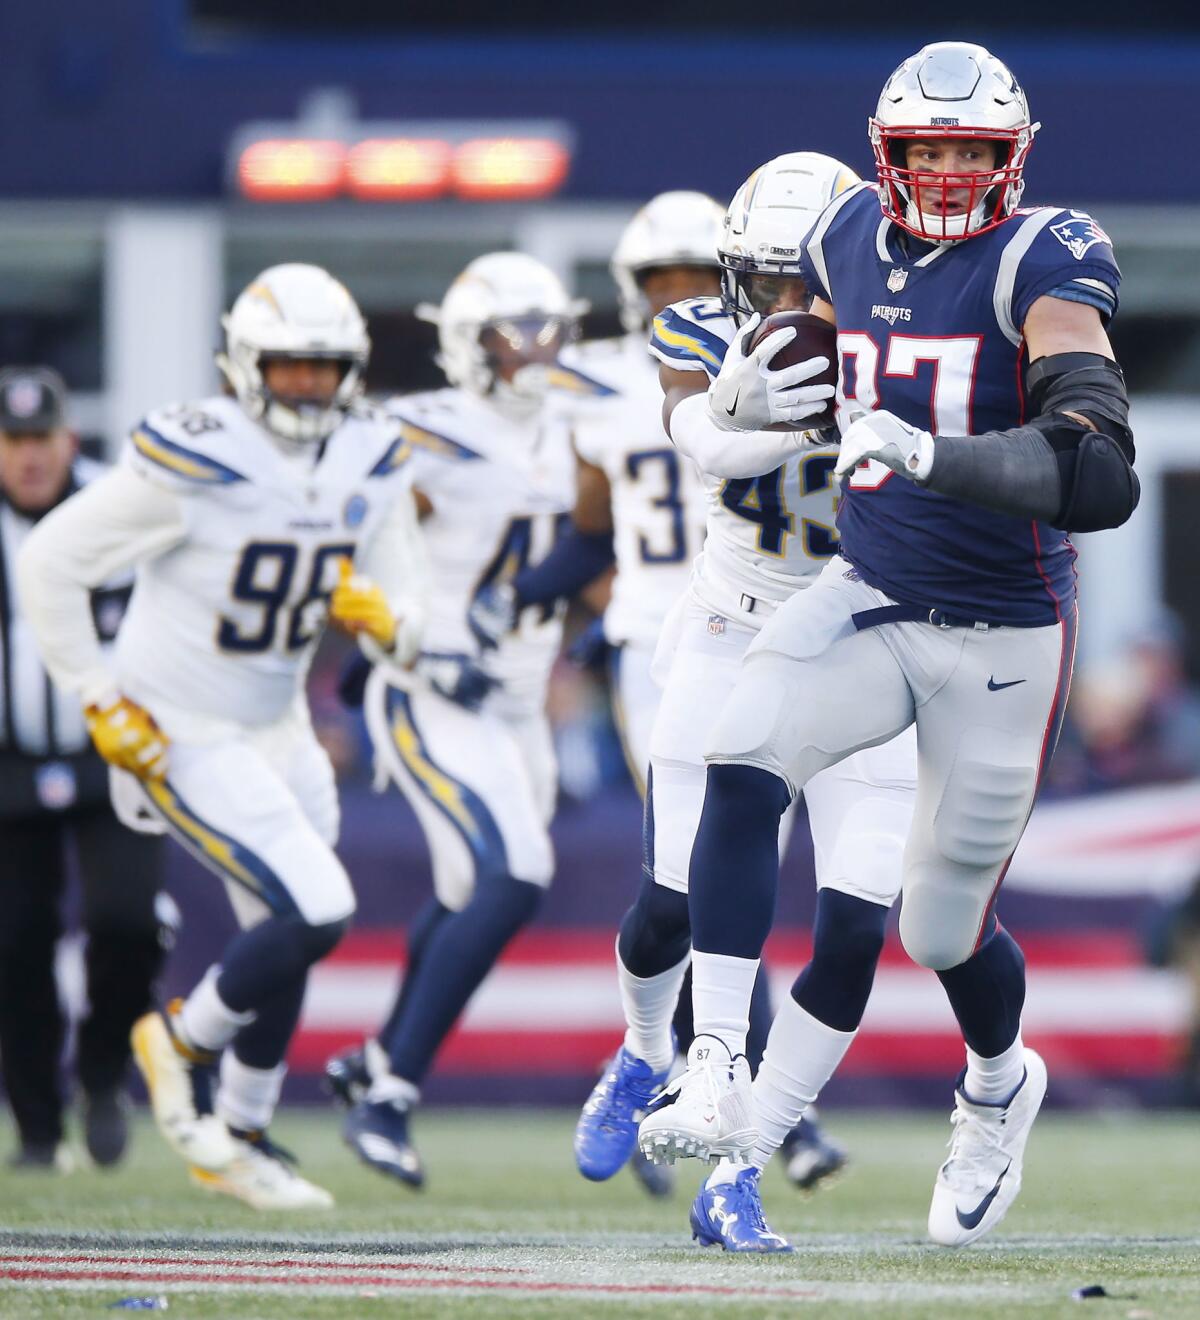 New England Patriots tight end Rob Gronkowski (R) runs after a reception against the Los Angeles Chargers in the third quarter of their AFC Divisional Playoff game at Gillette Stadium in Foxborough, Massachusetts, USA, 13 January 2019. The winner will face the Kansas City Chiefs on 20 January, 2019 in the AFC Championship game.